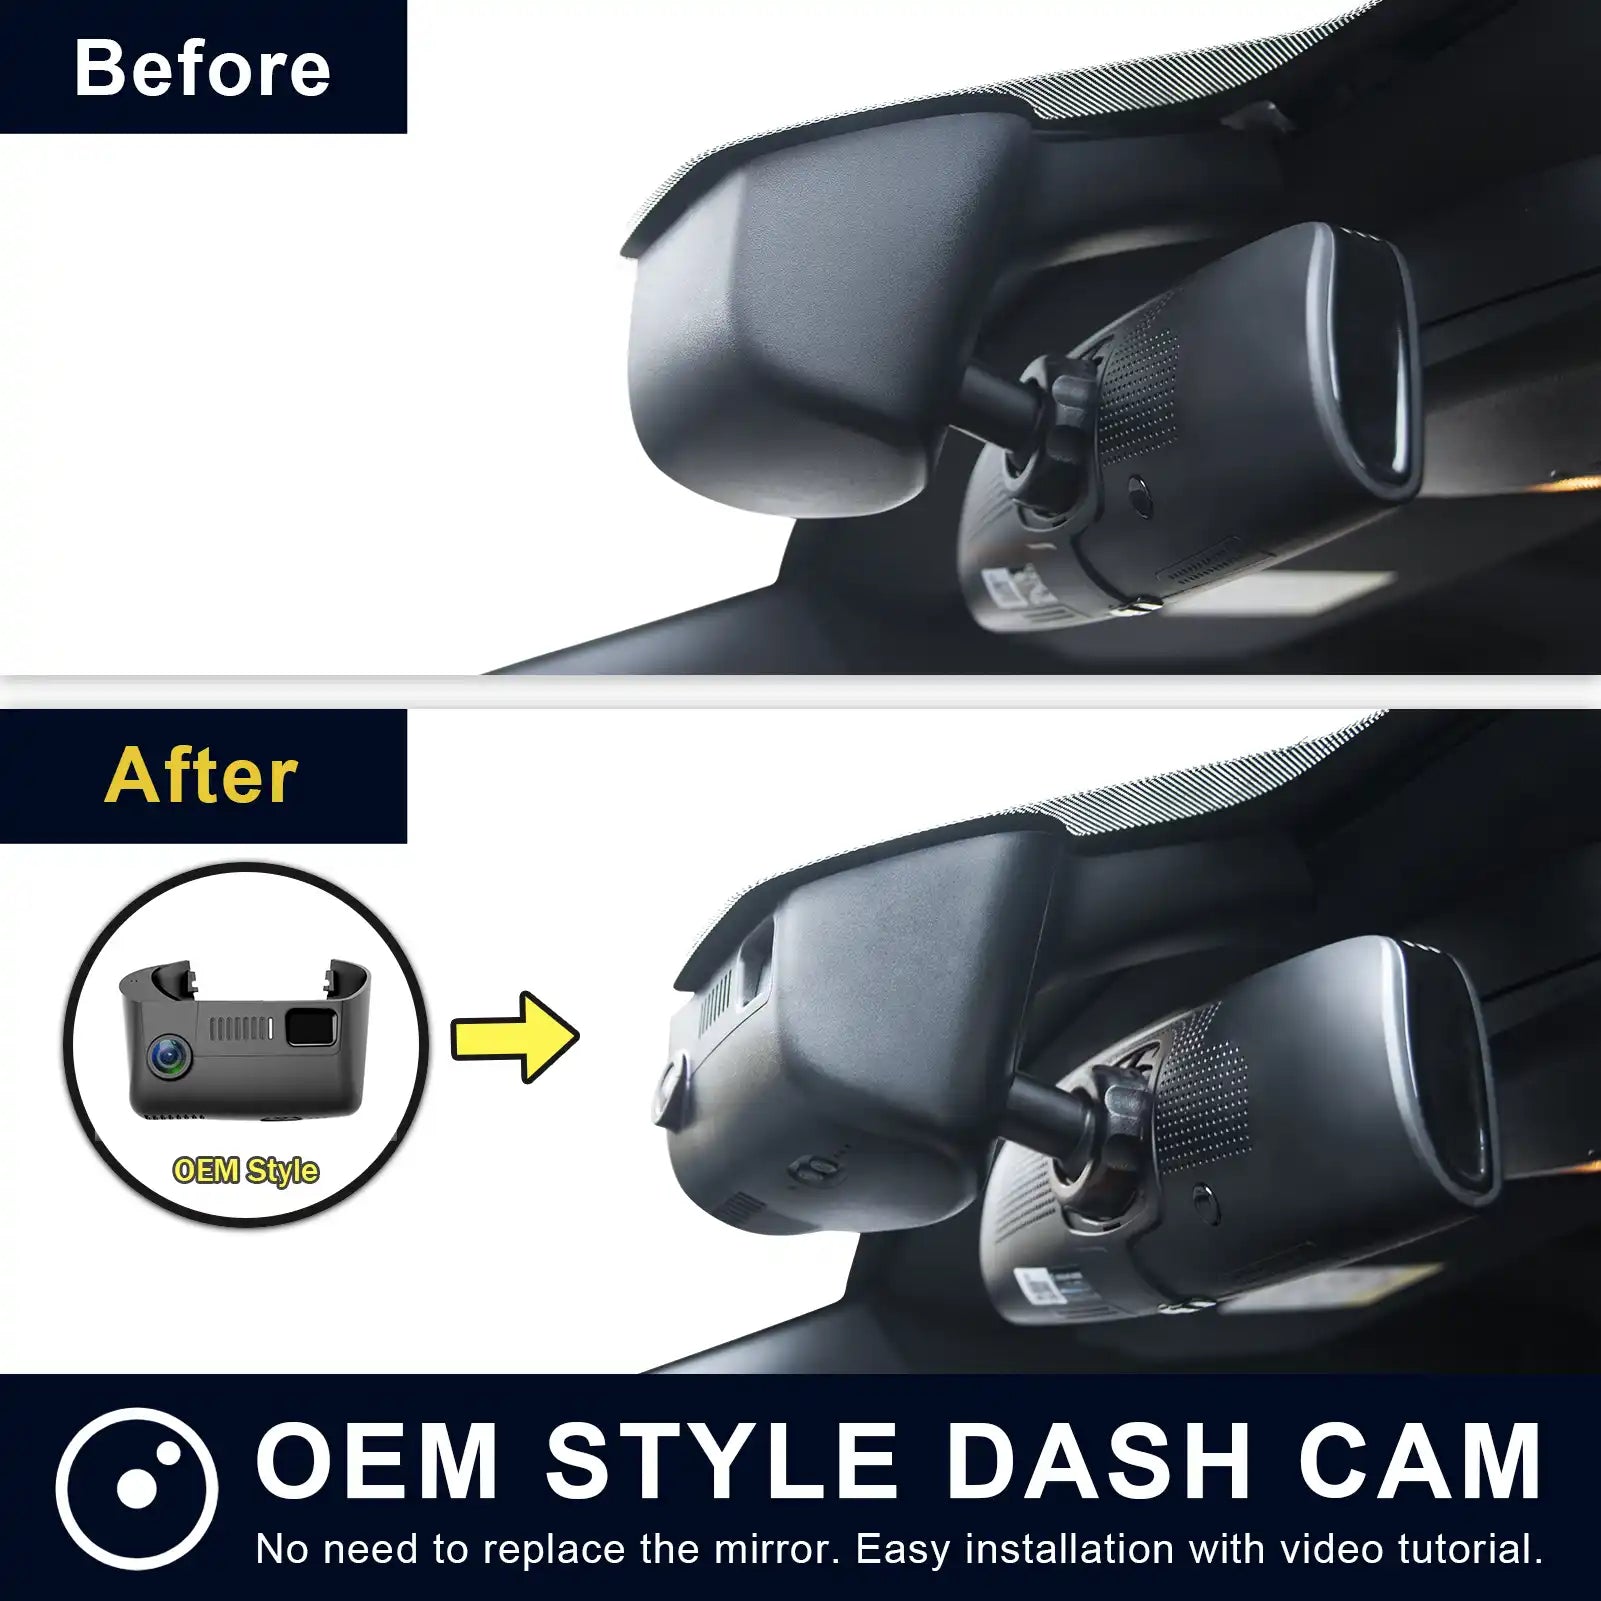 Dodge Challenger before and after dash cam installation view